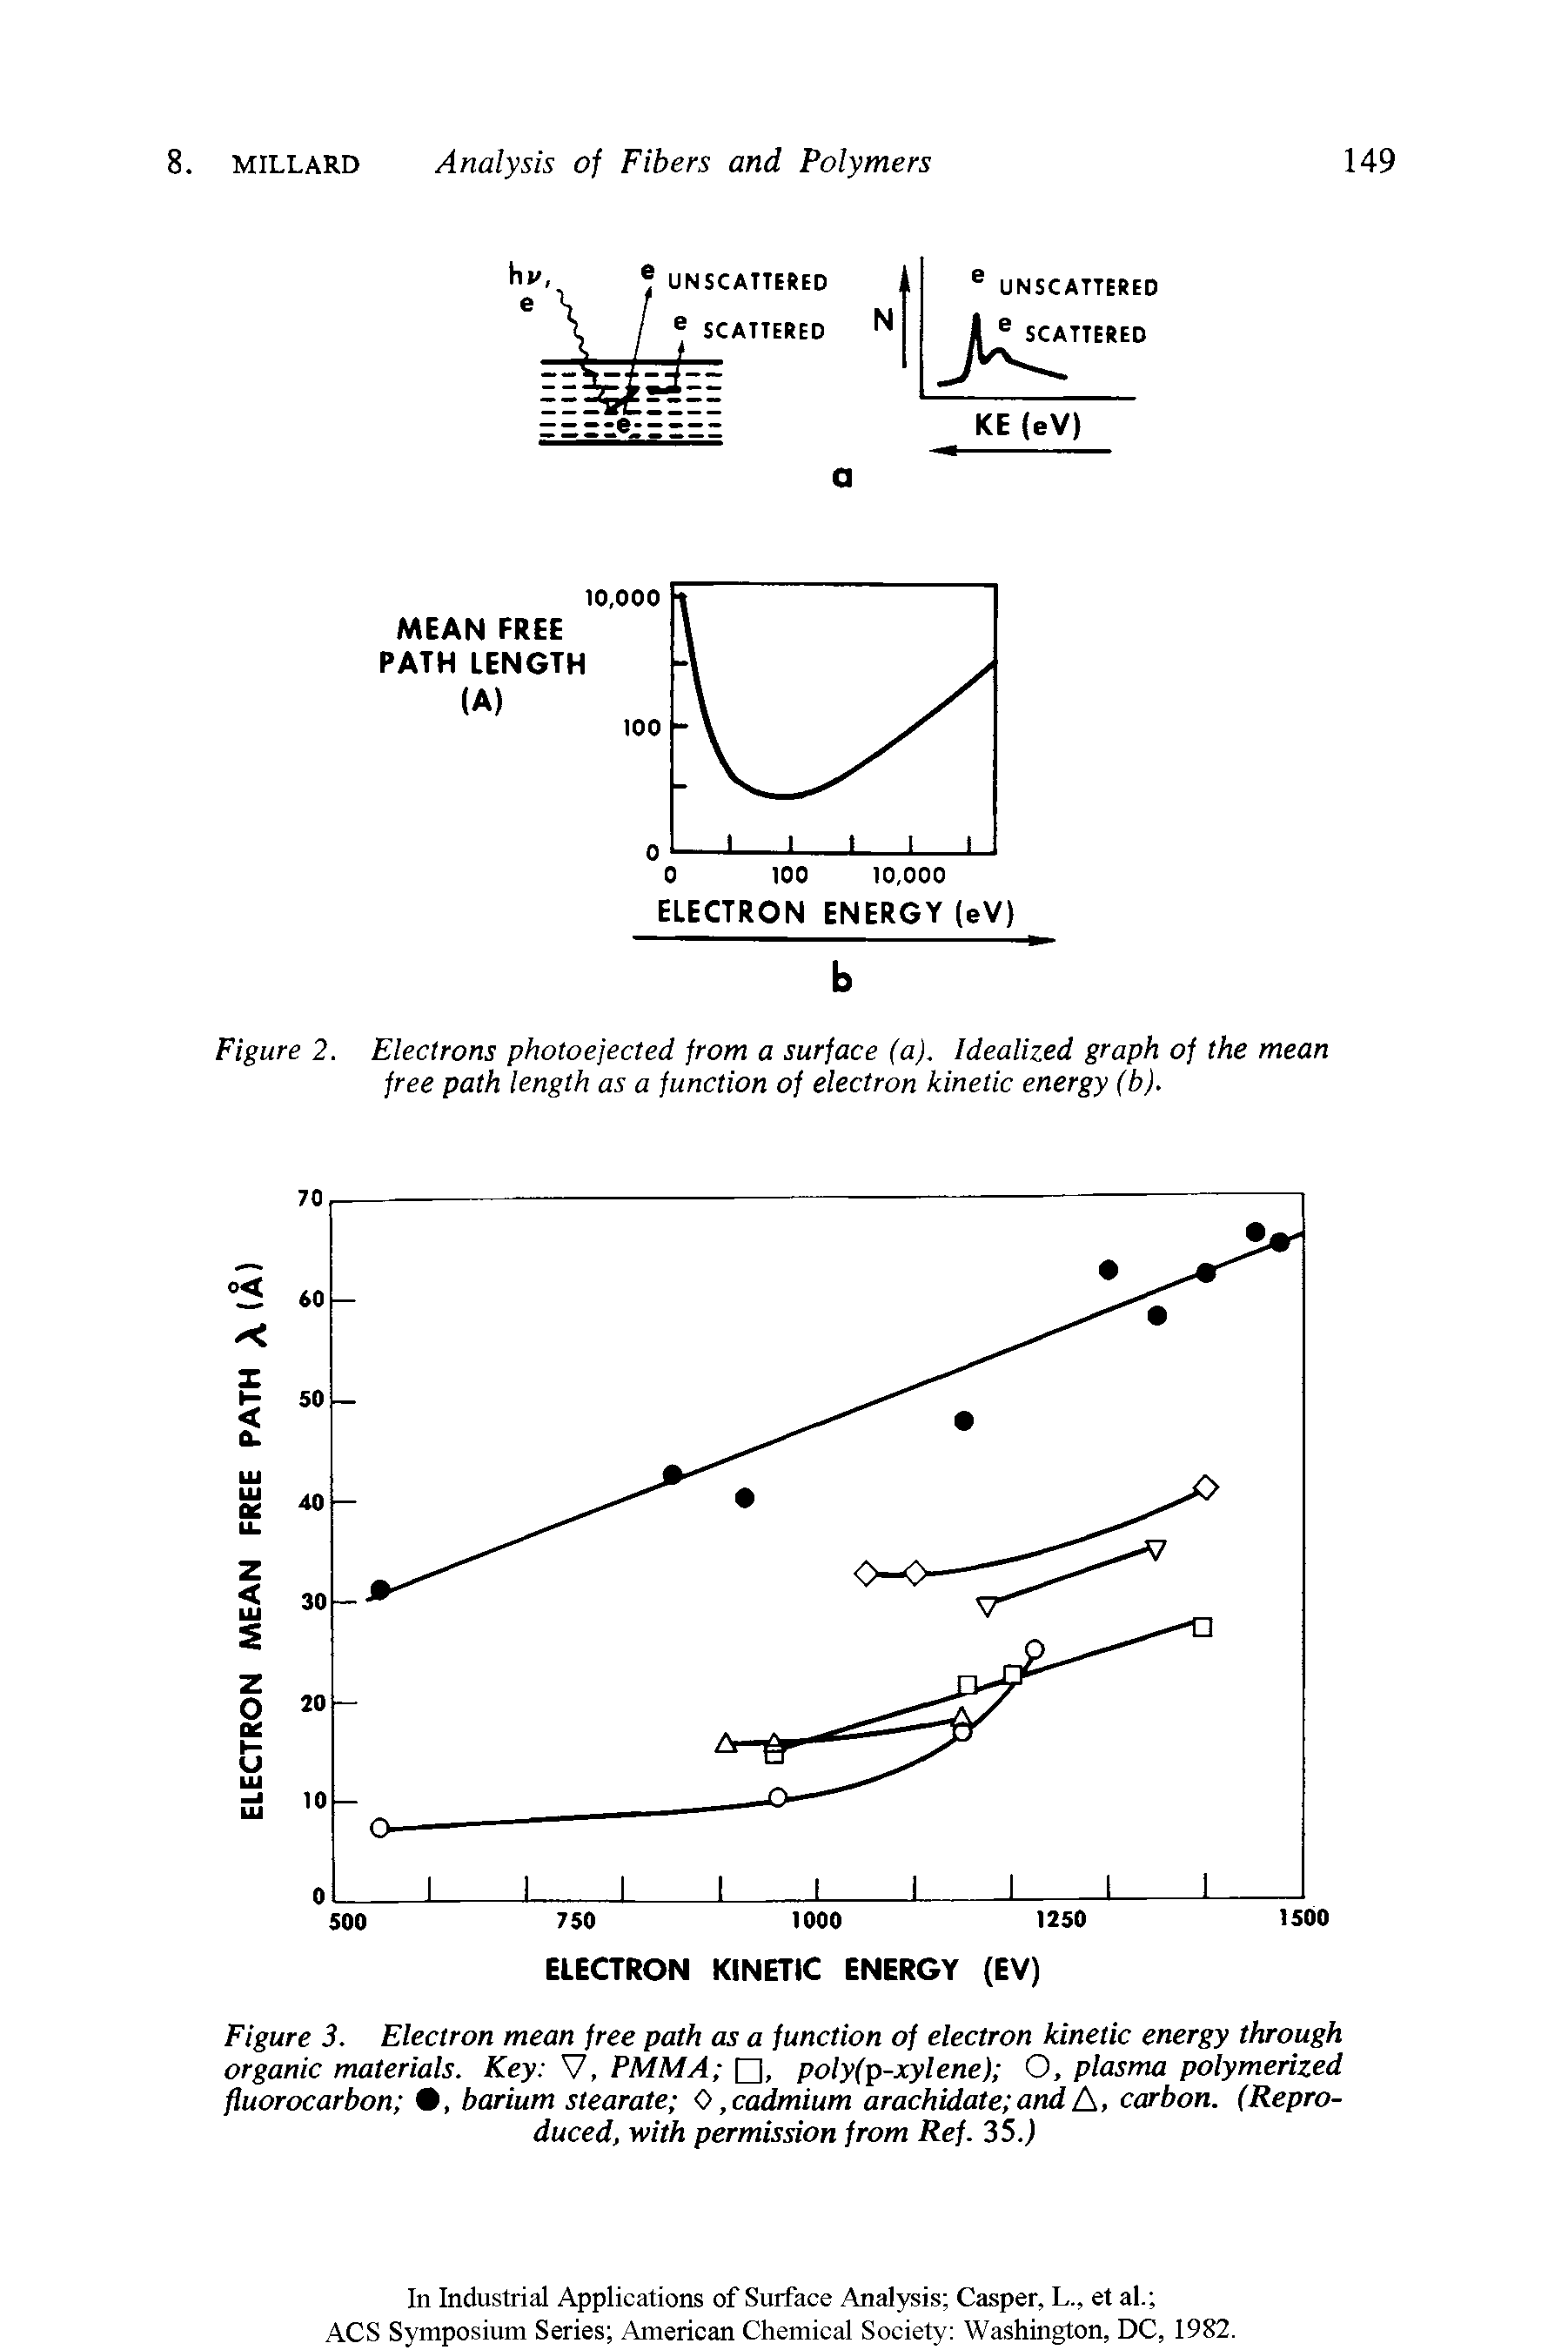 Figure 3. Electron mean free path as a function of electron kinetic energy through organic materials. Key V, PMMA , poly(p-xylene) O, plasma polymerized fluorocarbon , barium stearate 0, cadmium arachidate and A, carbon. (Reproduced, with permission from Ref. 35.)...